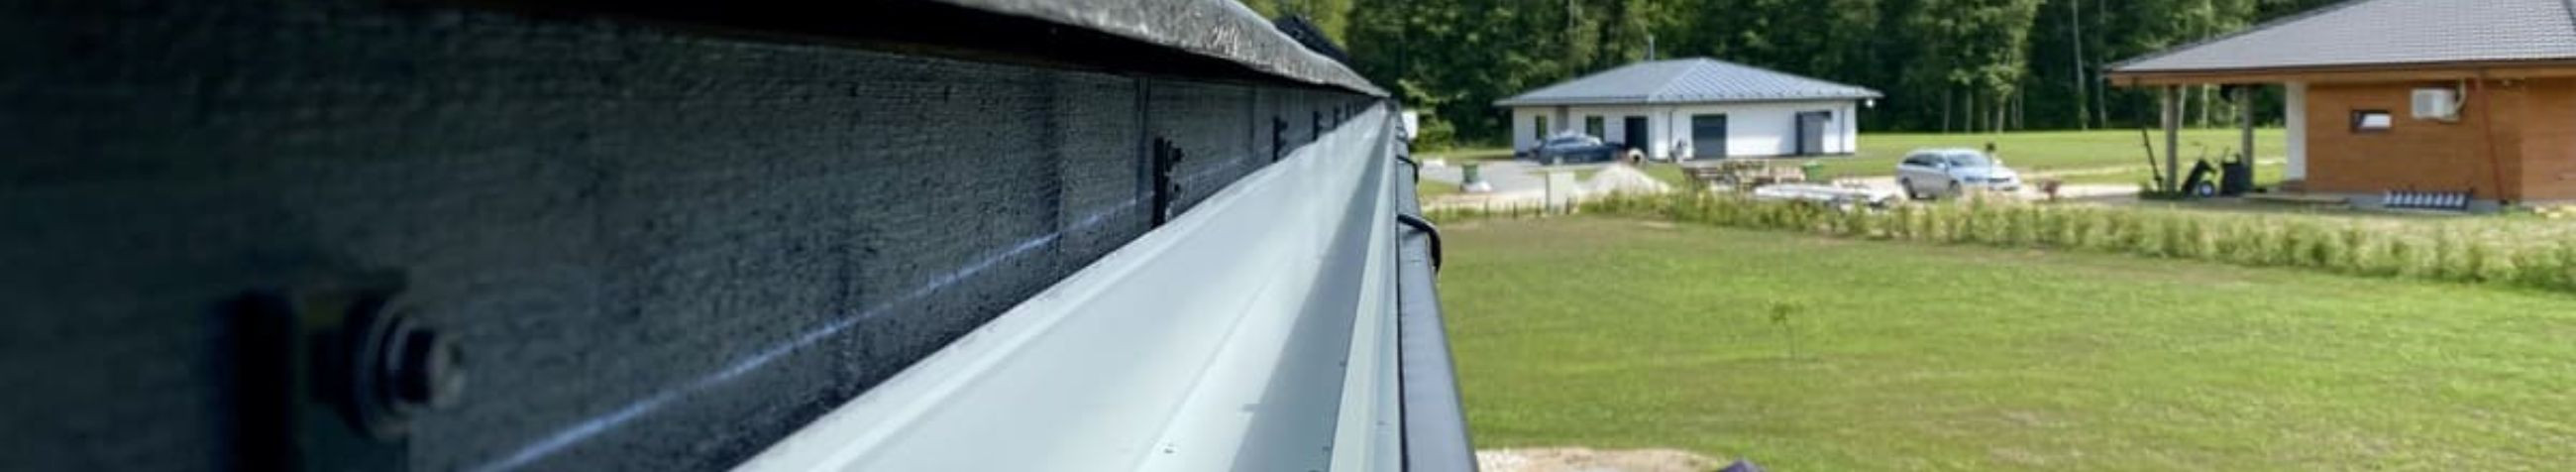 gutter maintenance, leak-free gutters, installation of rainwater system, installation of roof safety products, security products, roof snow barriers, gearways, wall and roof ladders, manufacture of gutters, installation of gutters